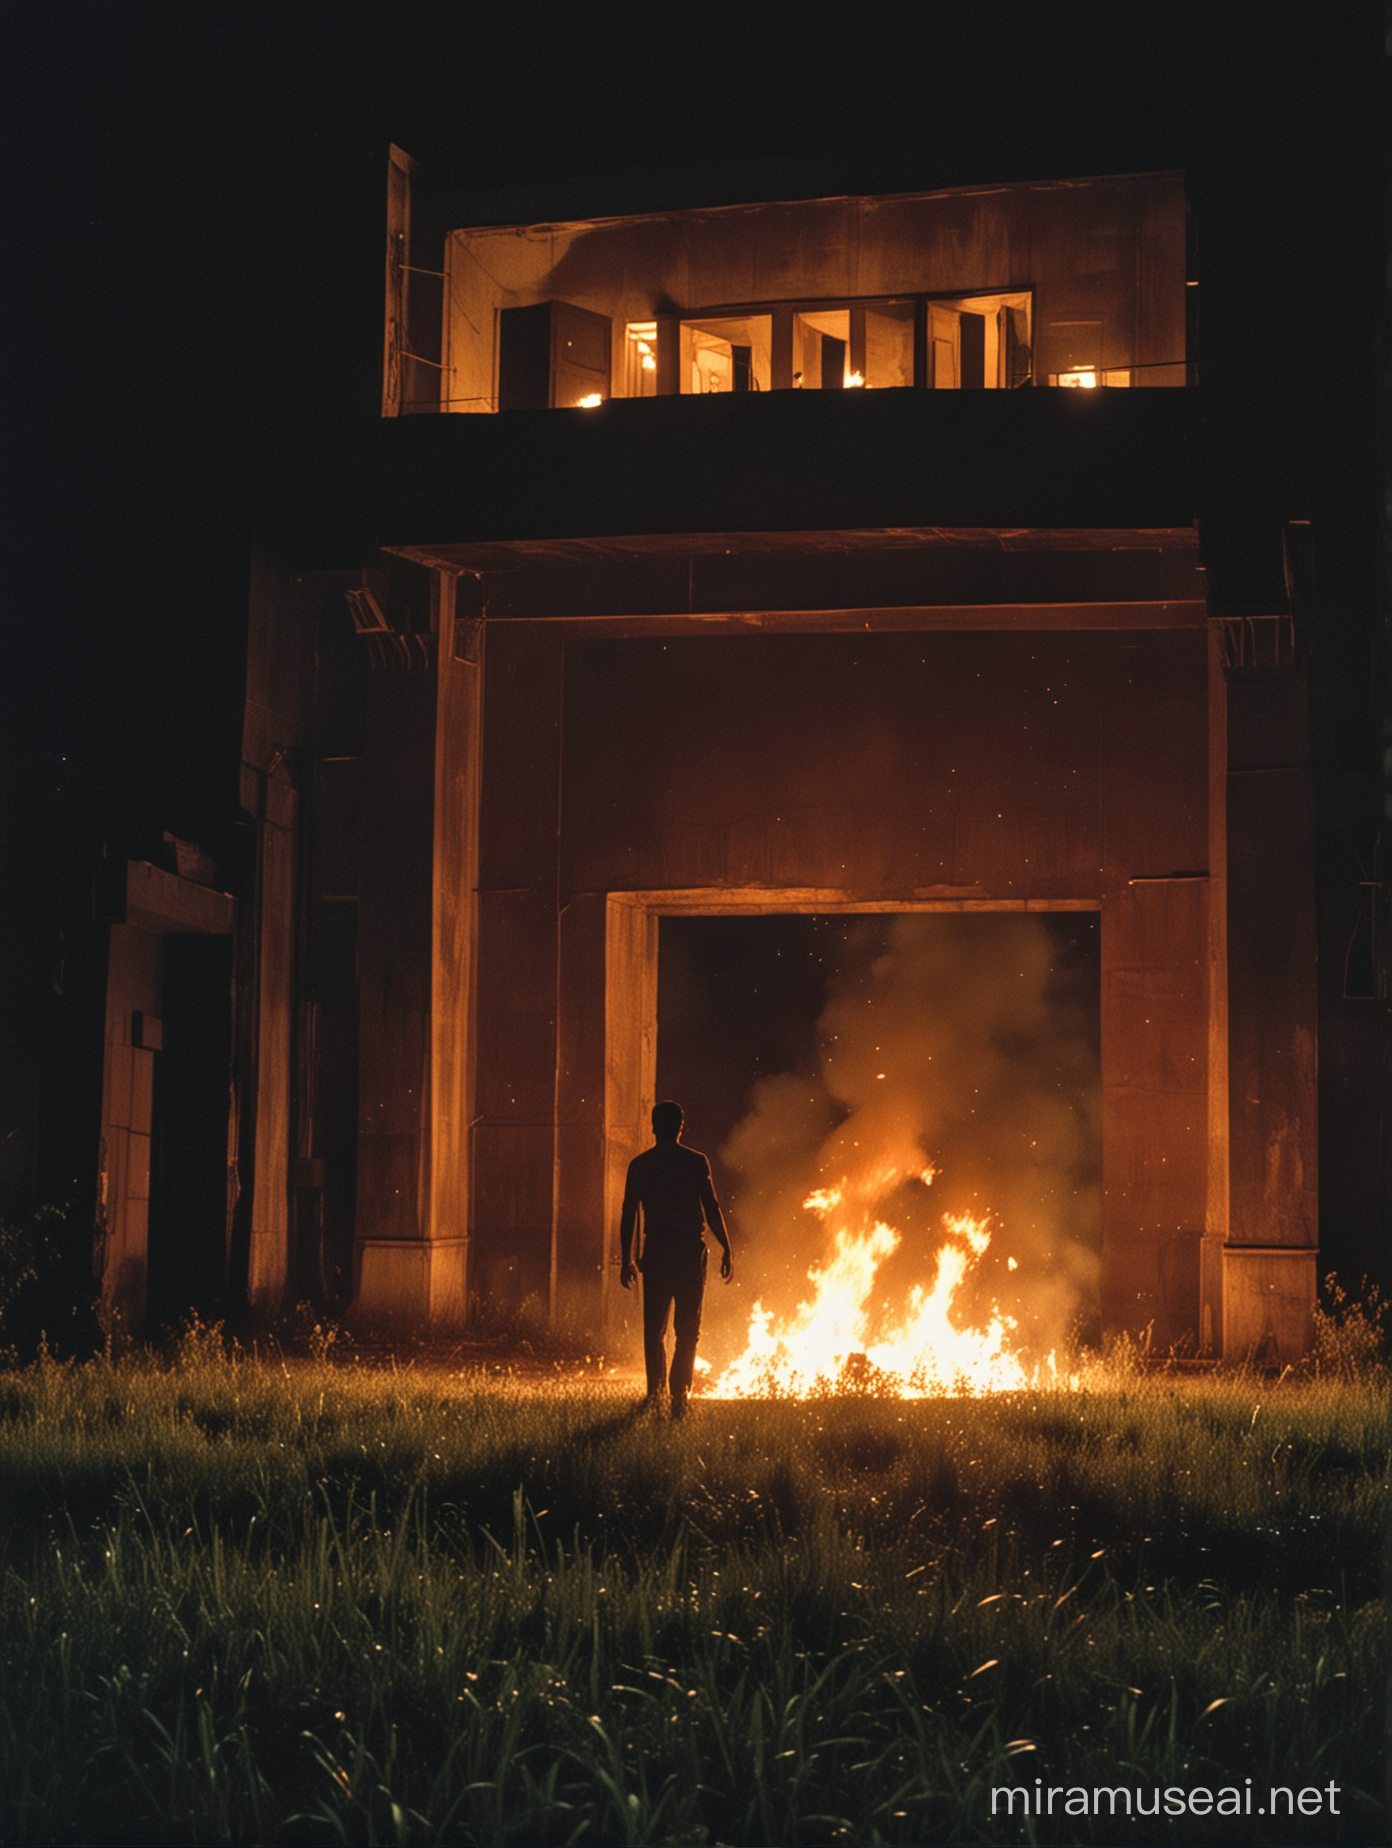 1998 A Night, old movie theatre in india, The fire is burning. A man falls from a balcony with his body on fire, in the middle of a grassy and bushy area, an old cinema theatre, night, cinematic. 